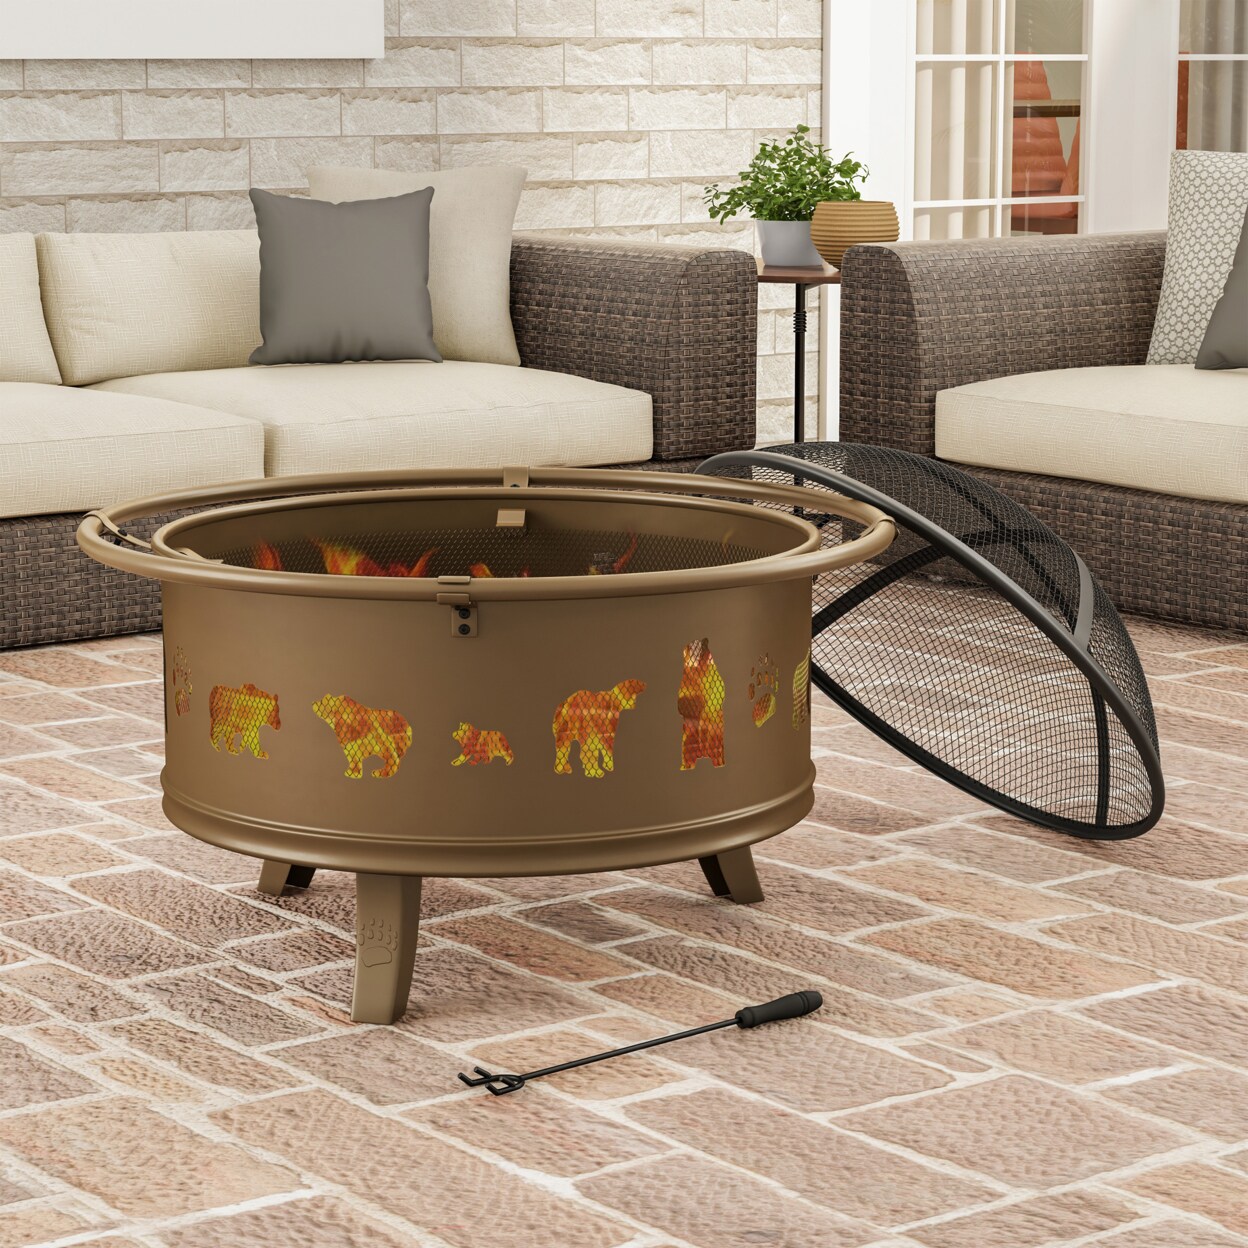 Pure Garden Outdoor Deep Fire Pit- Round Large Steel Bowl with Bear Cutouts Mesh Spark Screen Log Poker and Storage Cover